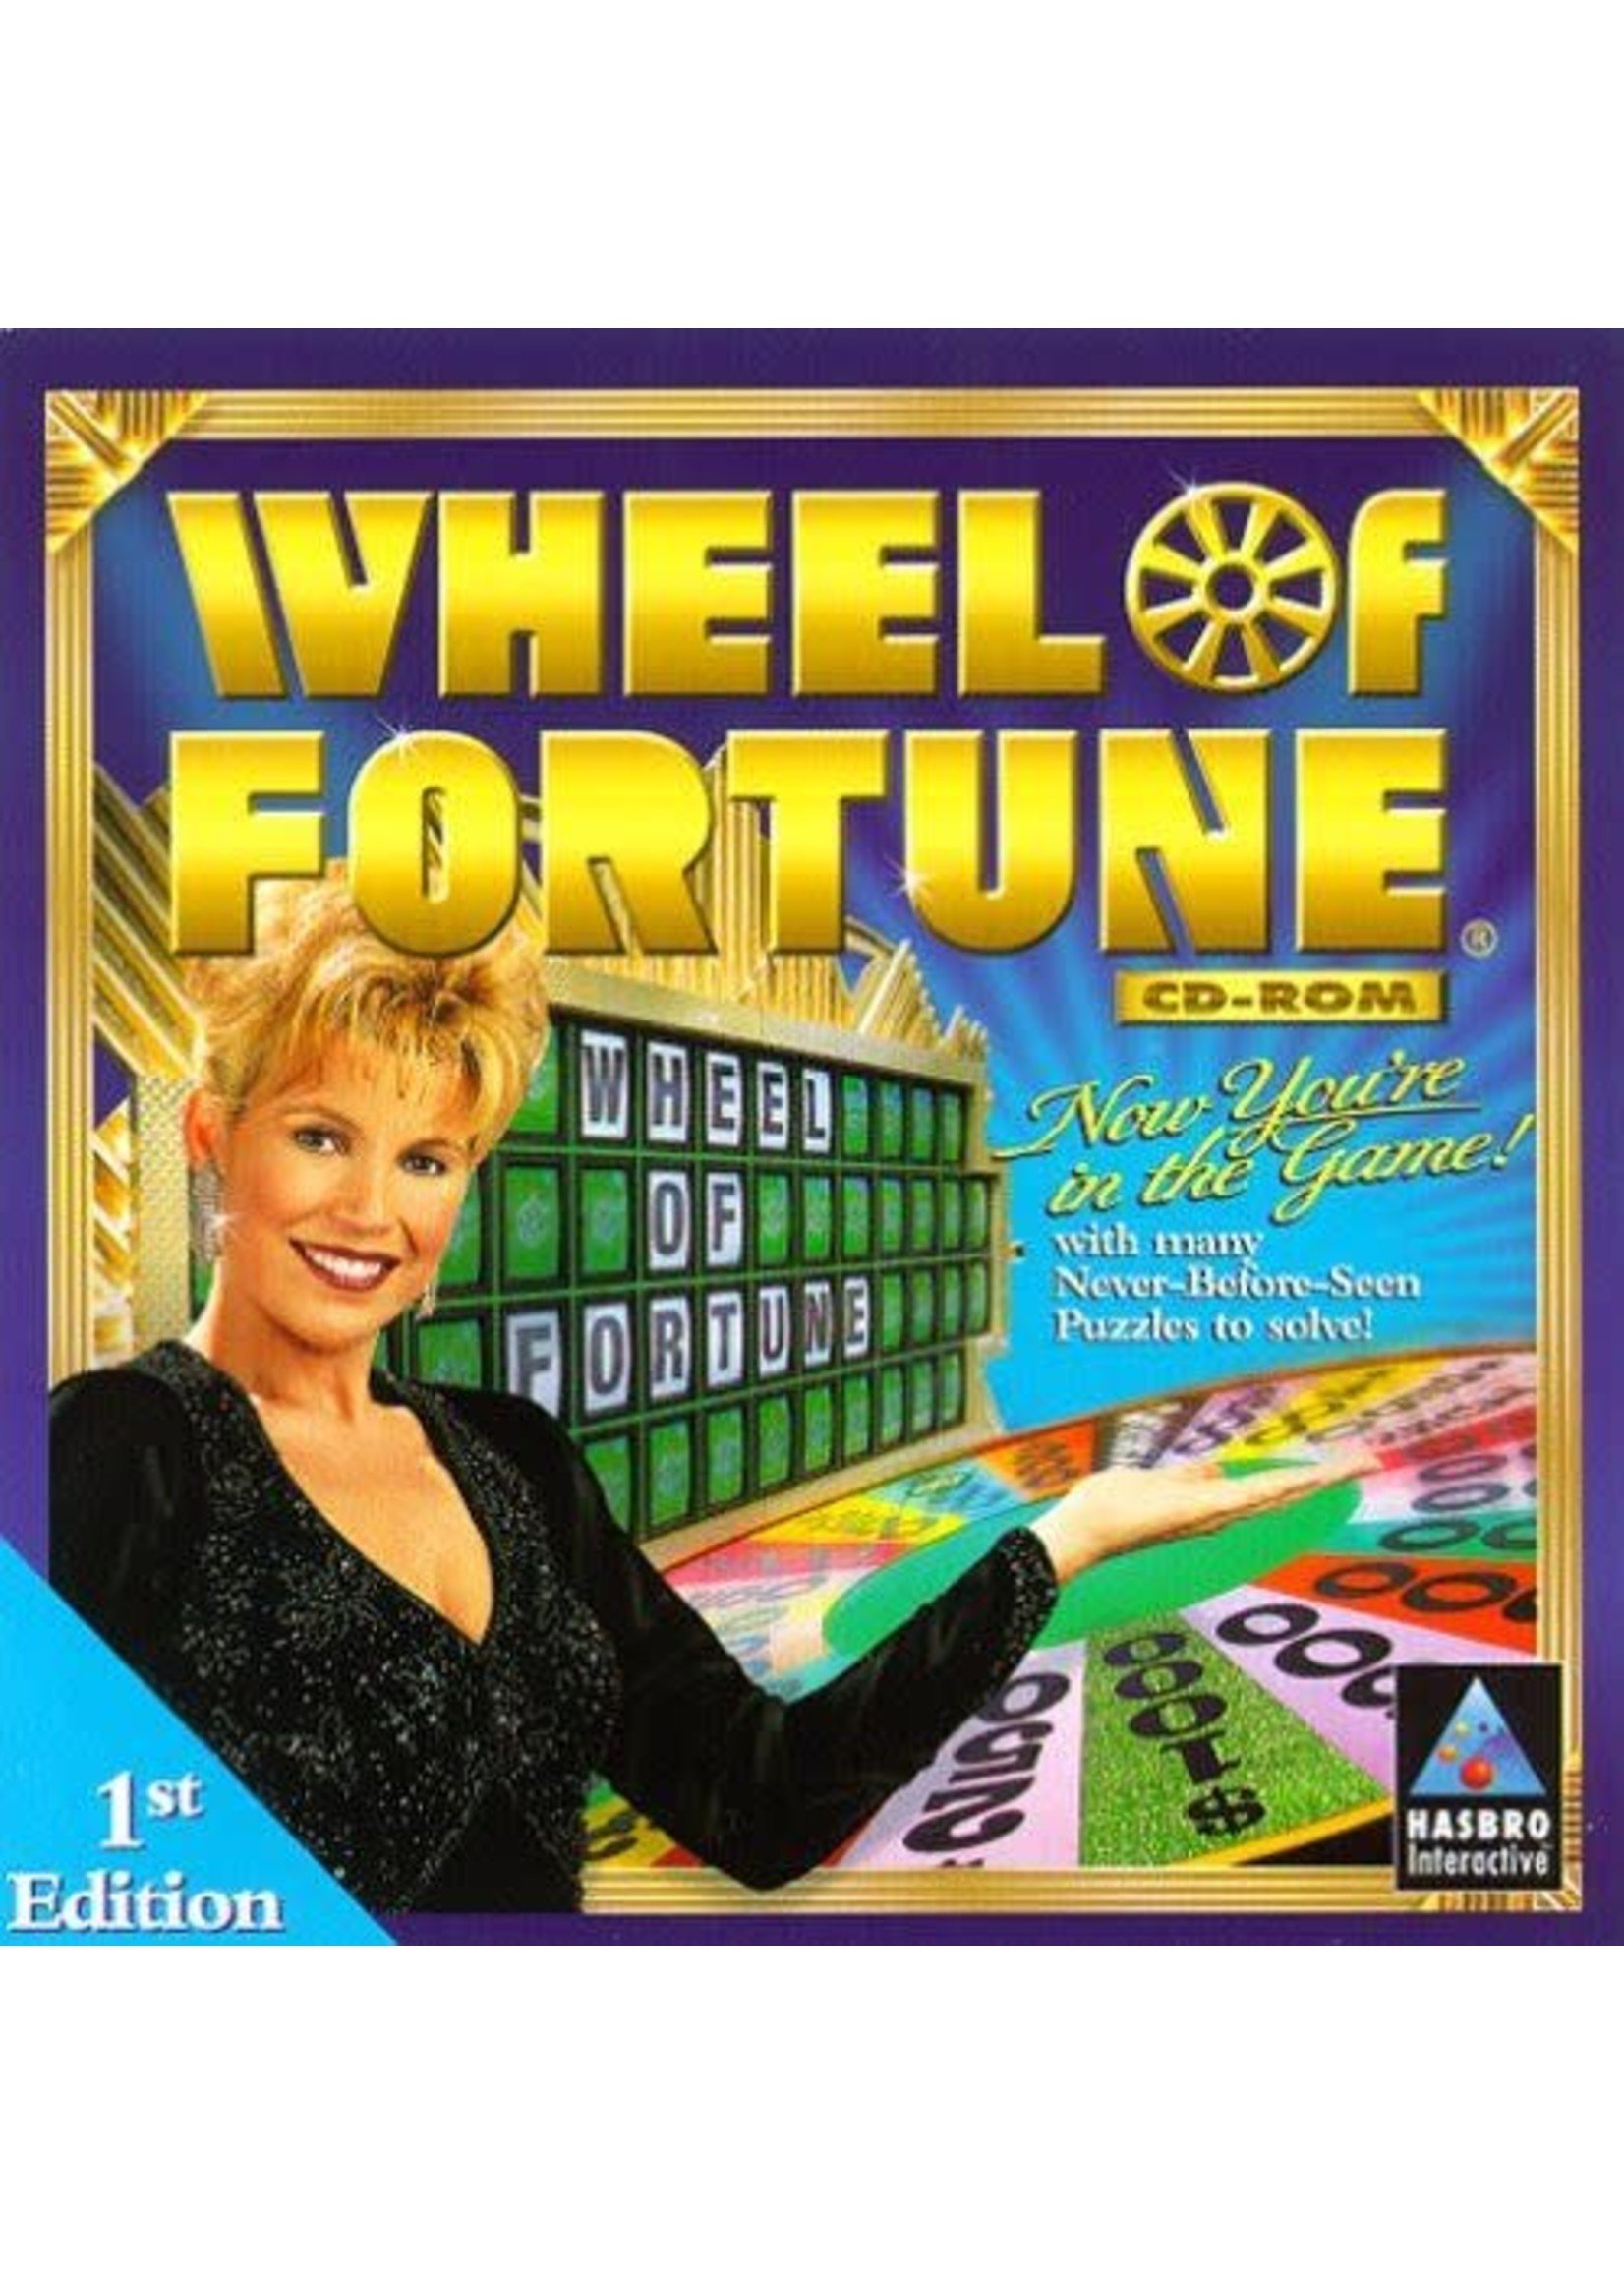 Sony Playstation 1 (PS1) Wheel of Fortune